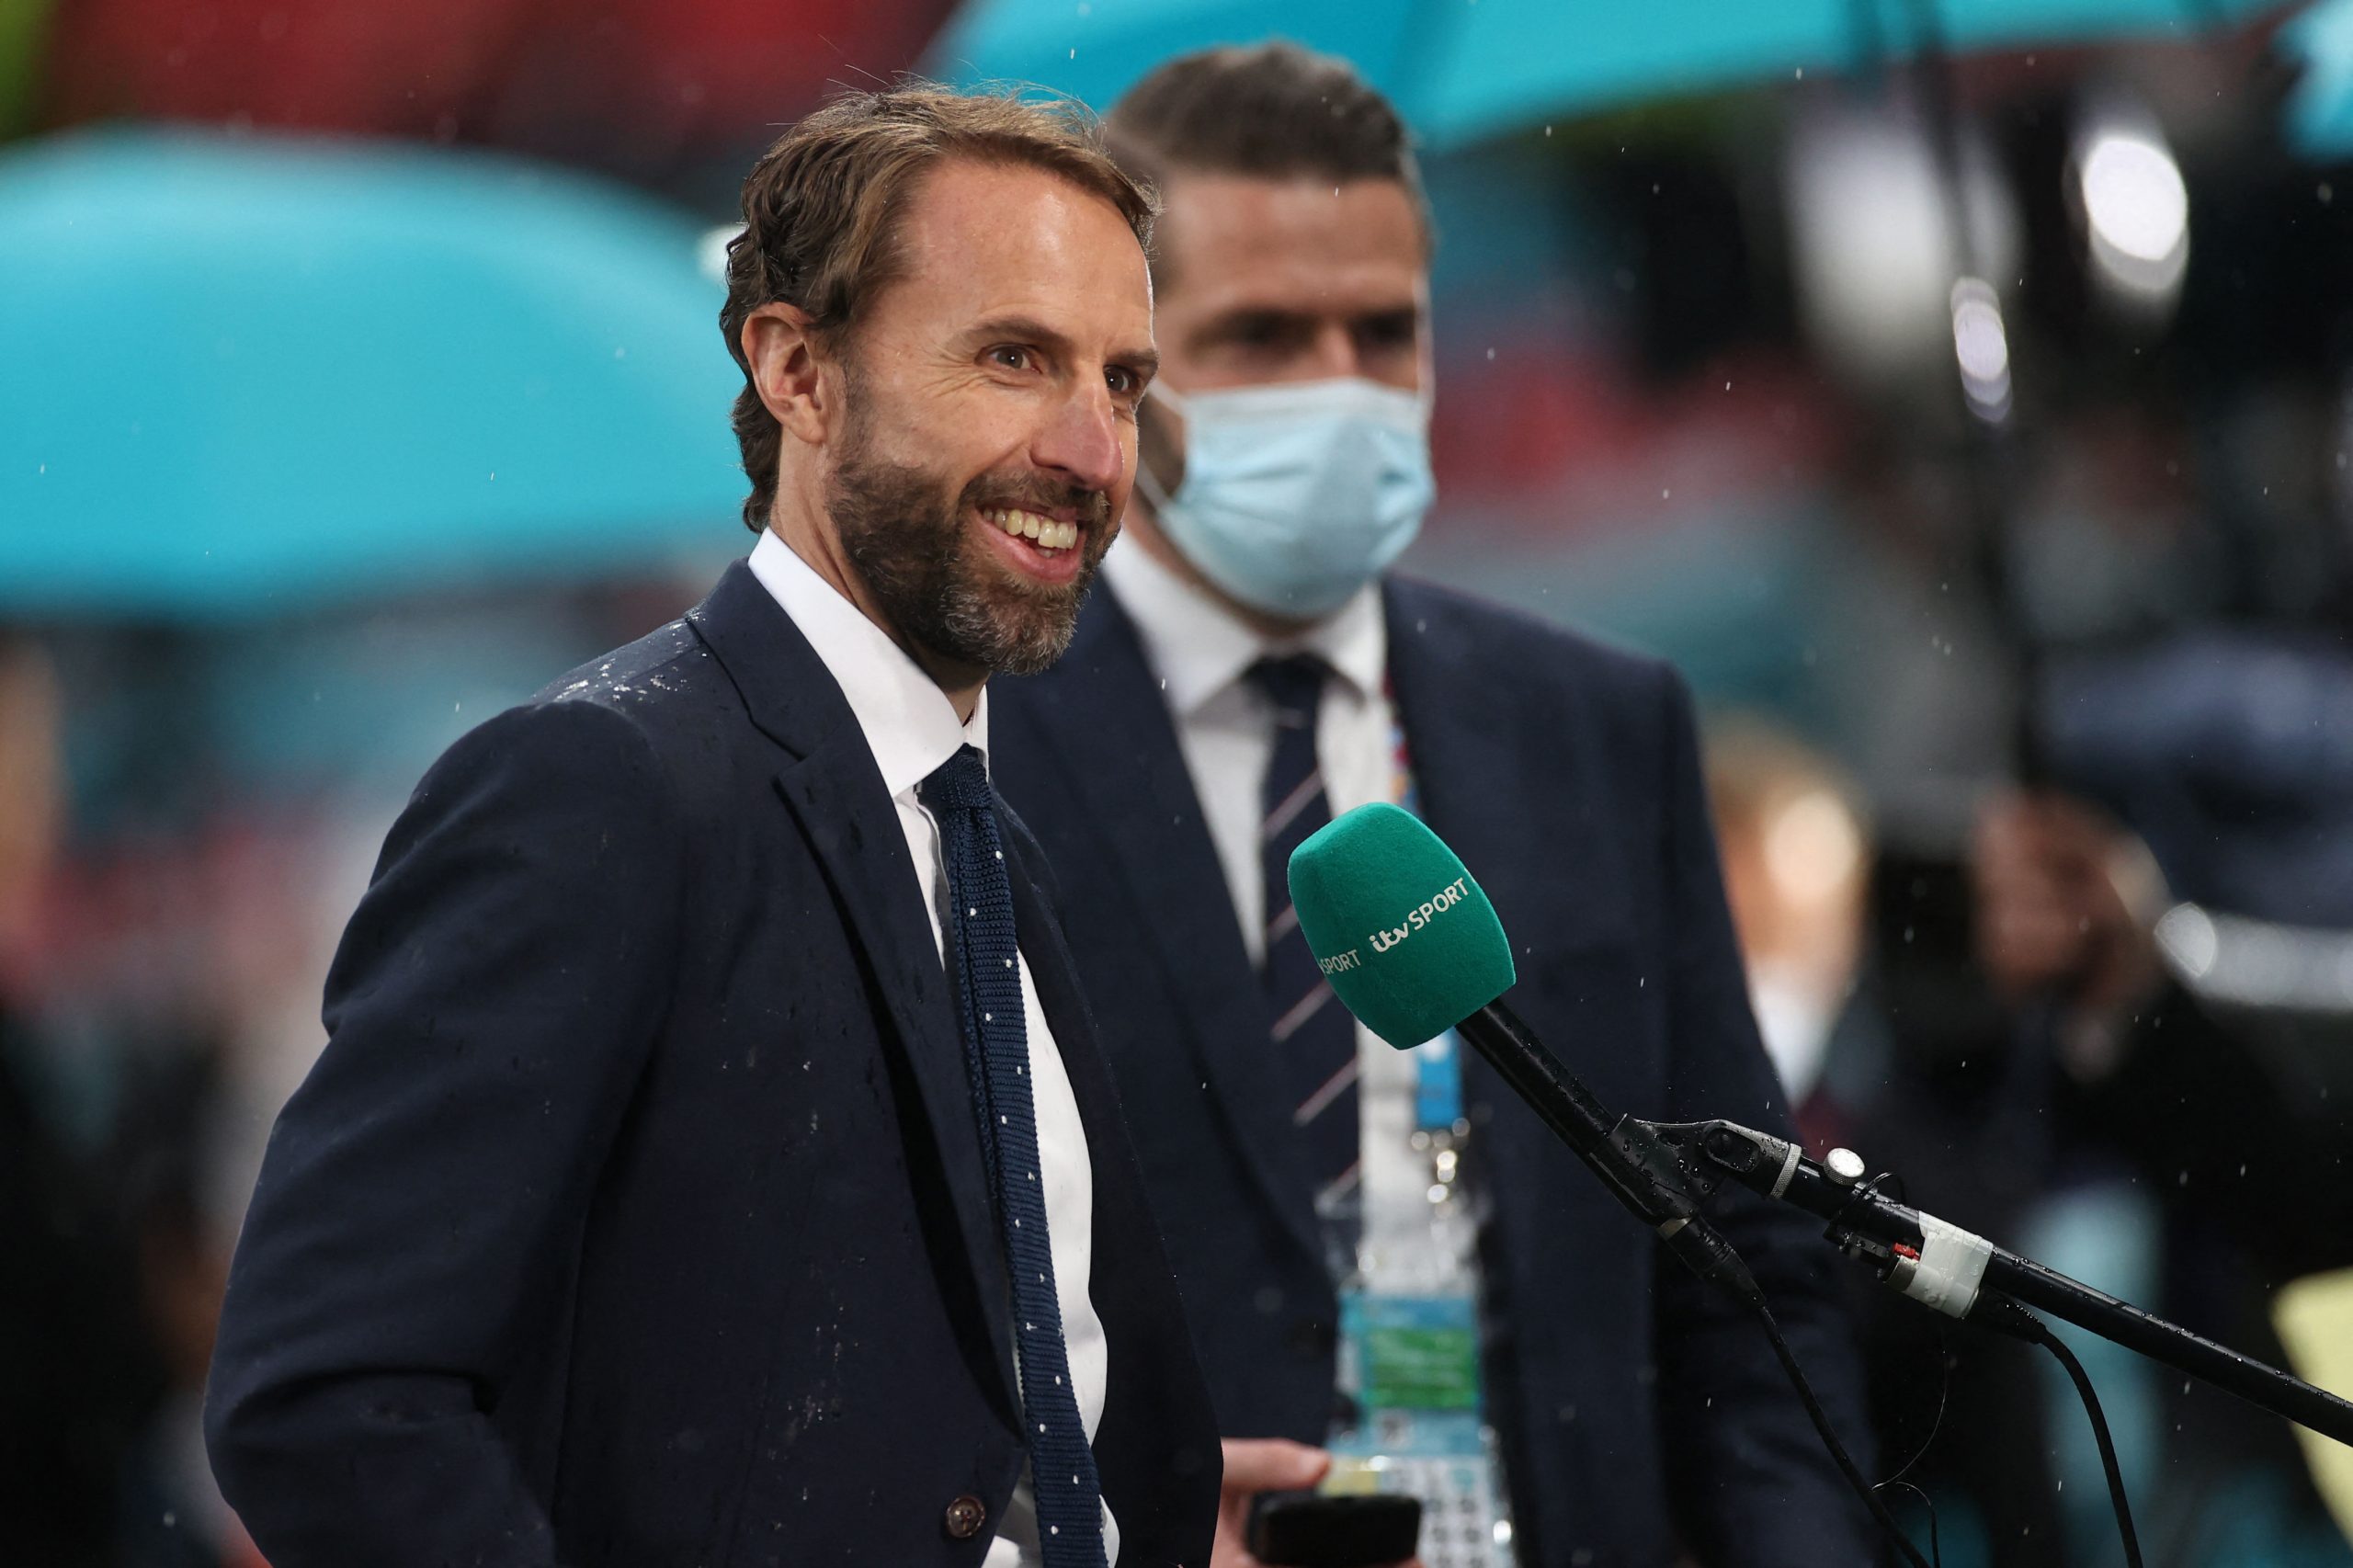 FIFA 2022: England players will take a knee before World Cup game with Iran